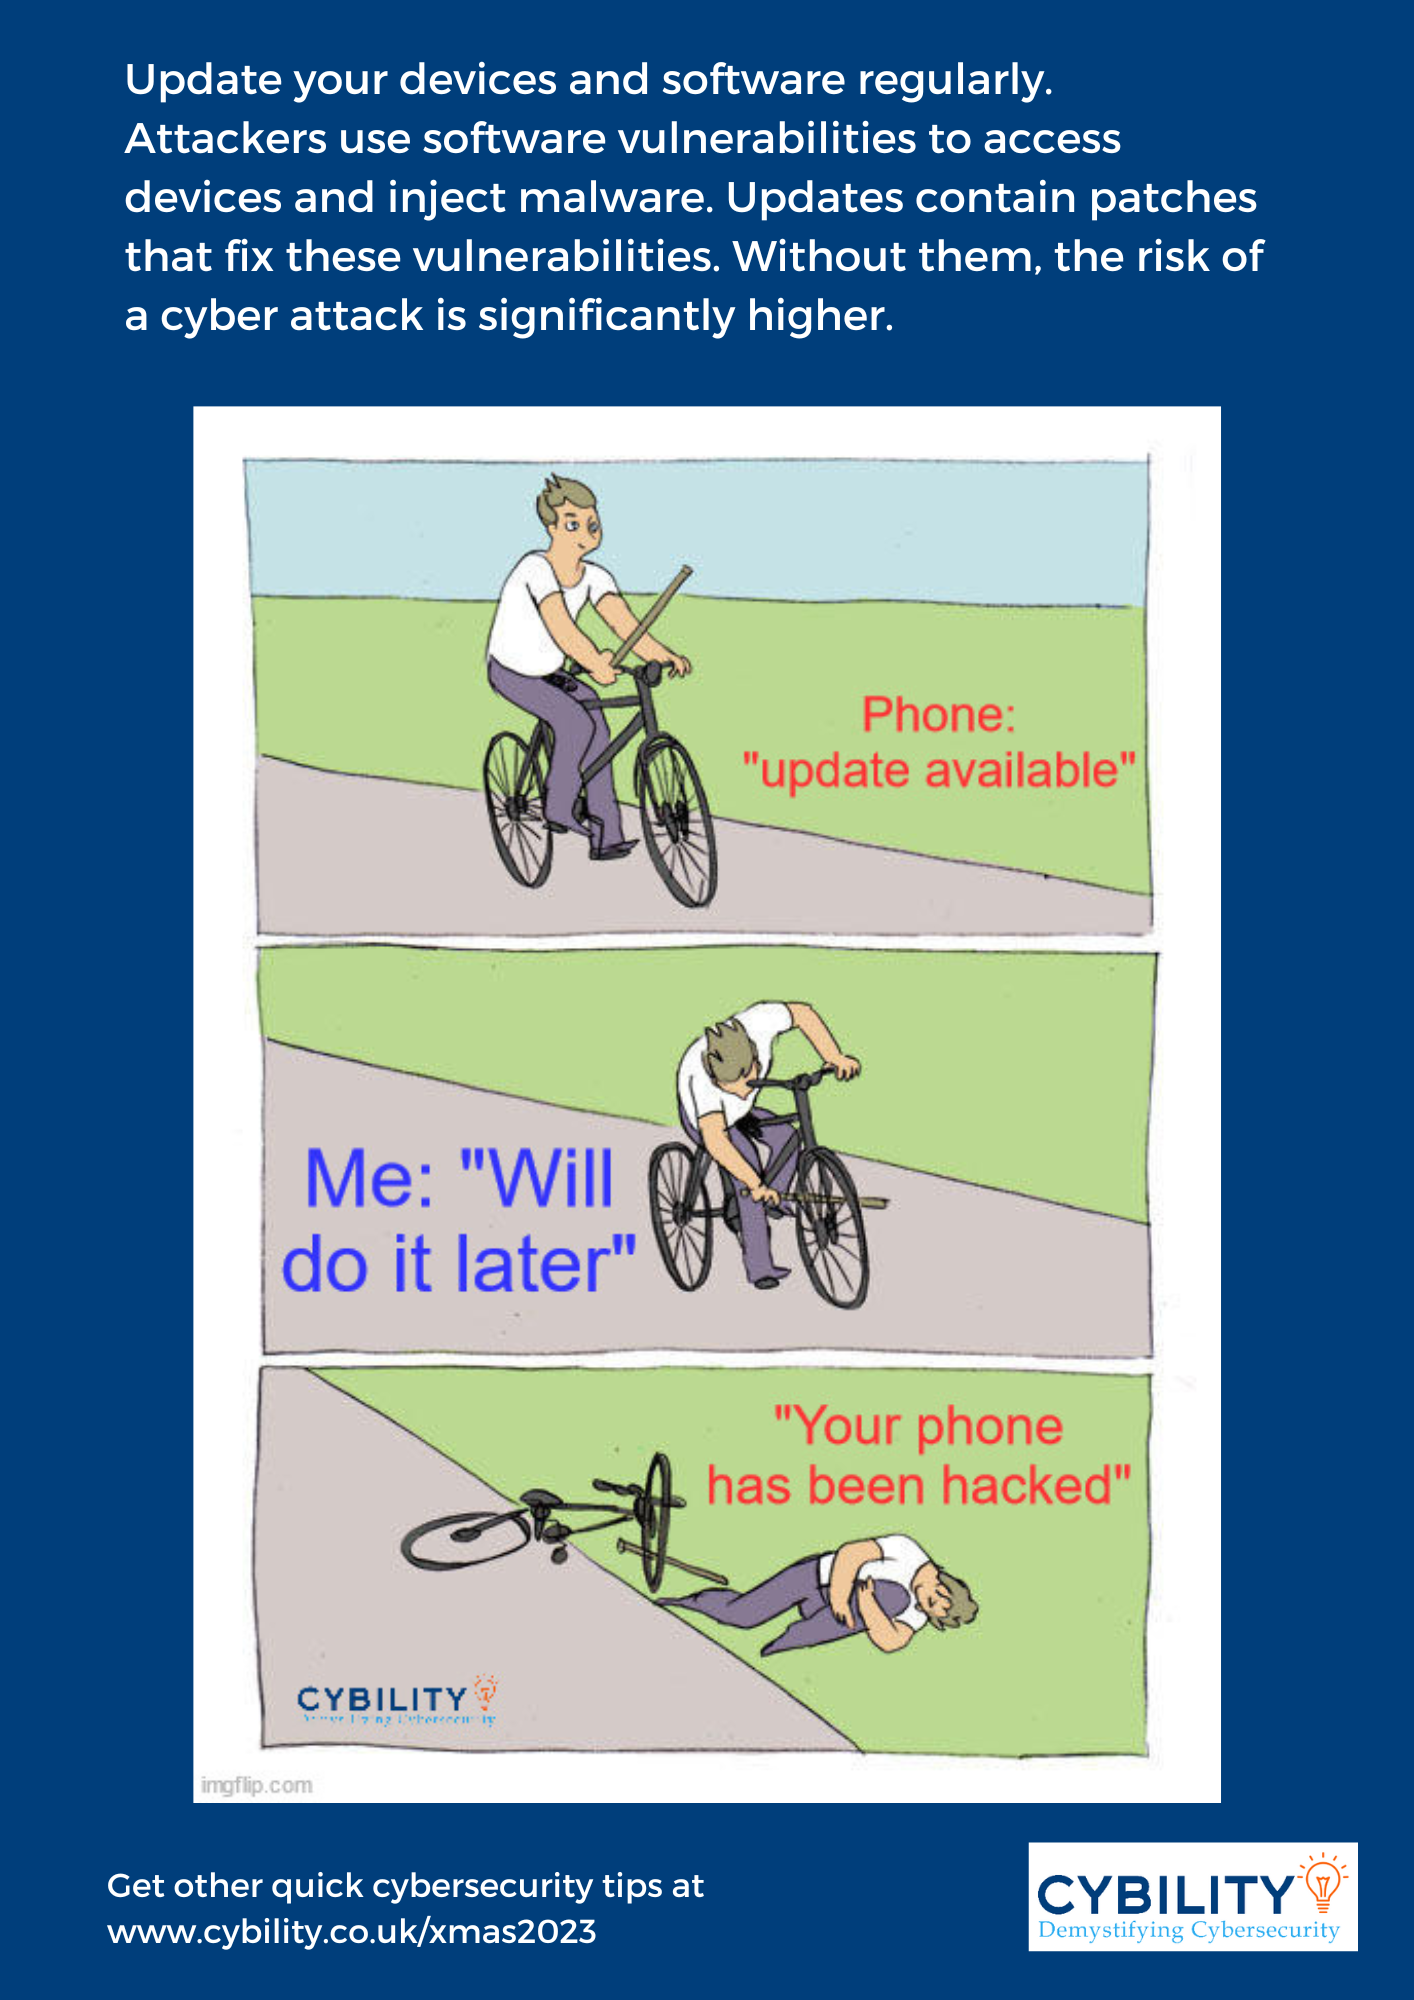 A meme called *update utopia* advising on cybersecurity shows a person cycling, ignoring an *update available* phone alert, then falling as the phone says *has been hacked*, underscoring prompt updates' necessity.